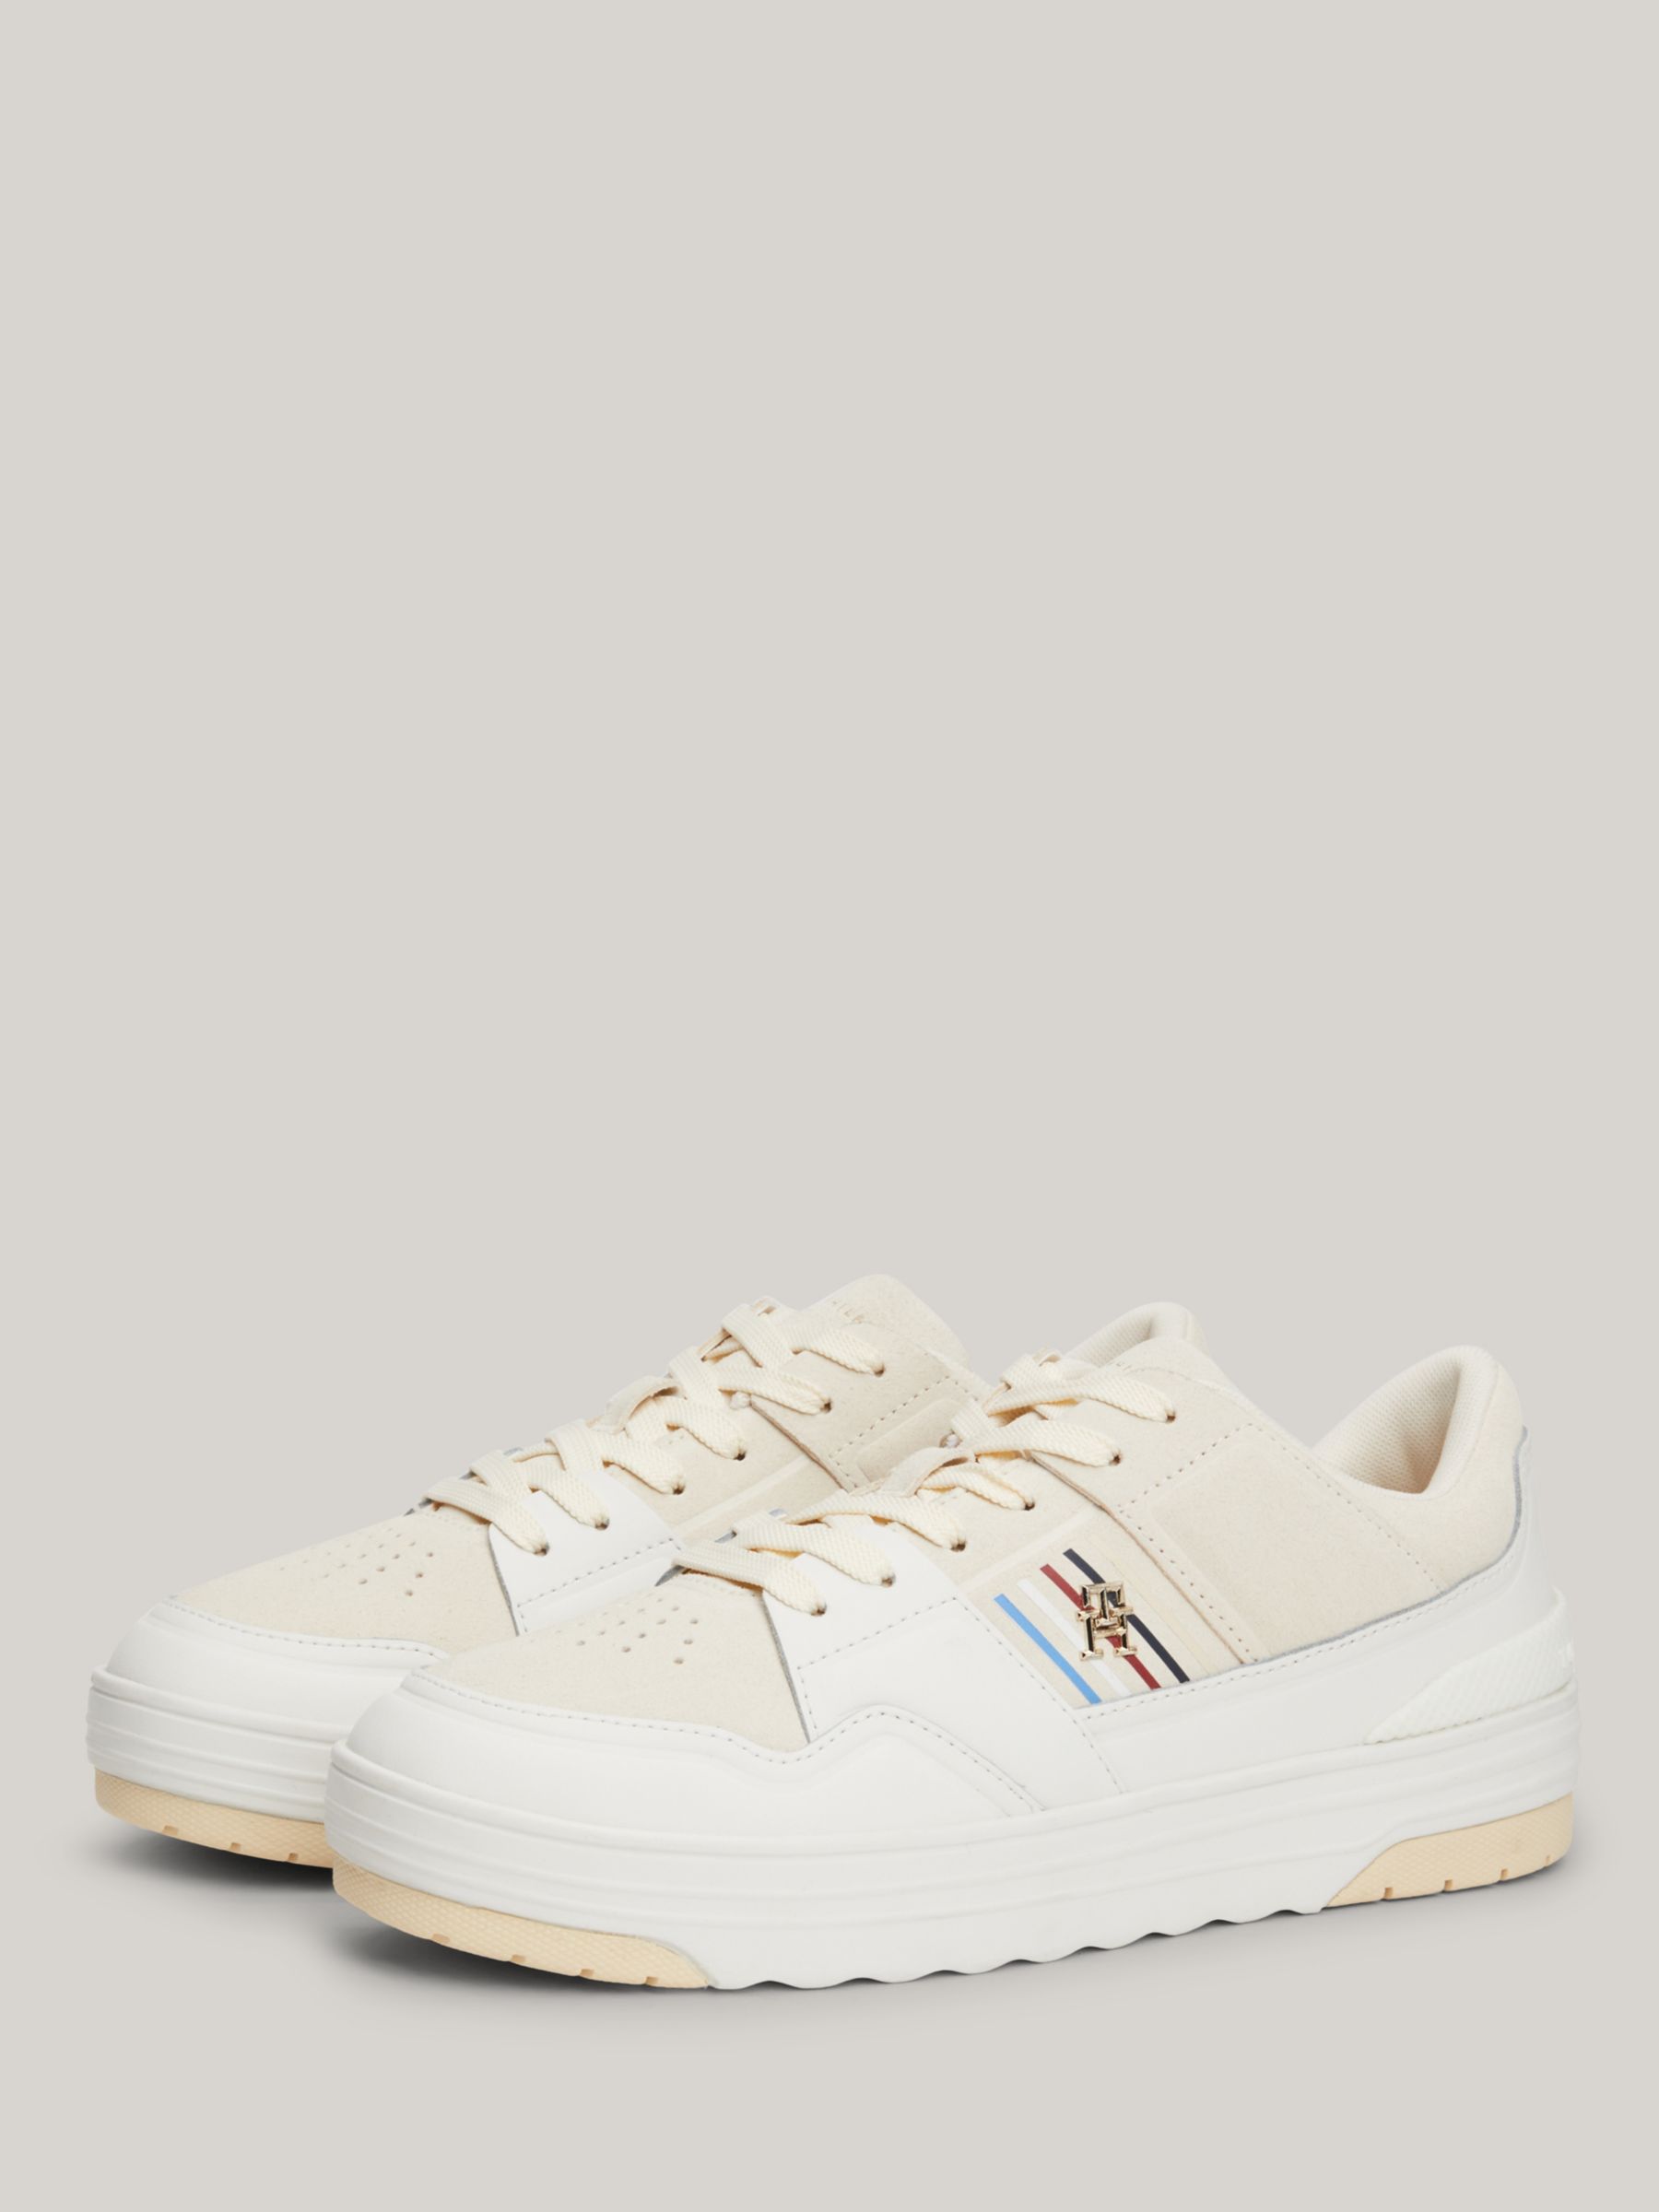 Buy Tommy Hilfiger Global Stripe Basketball Trainers, Calico Online at johnlewis.com